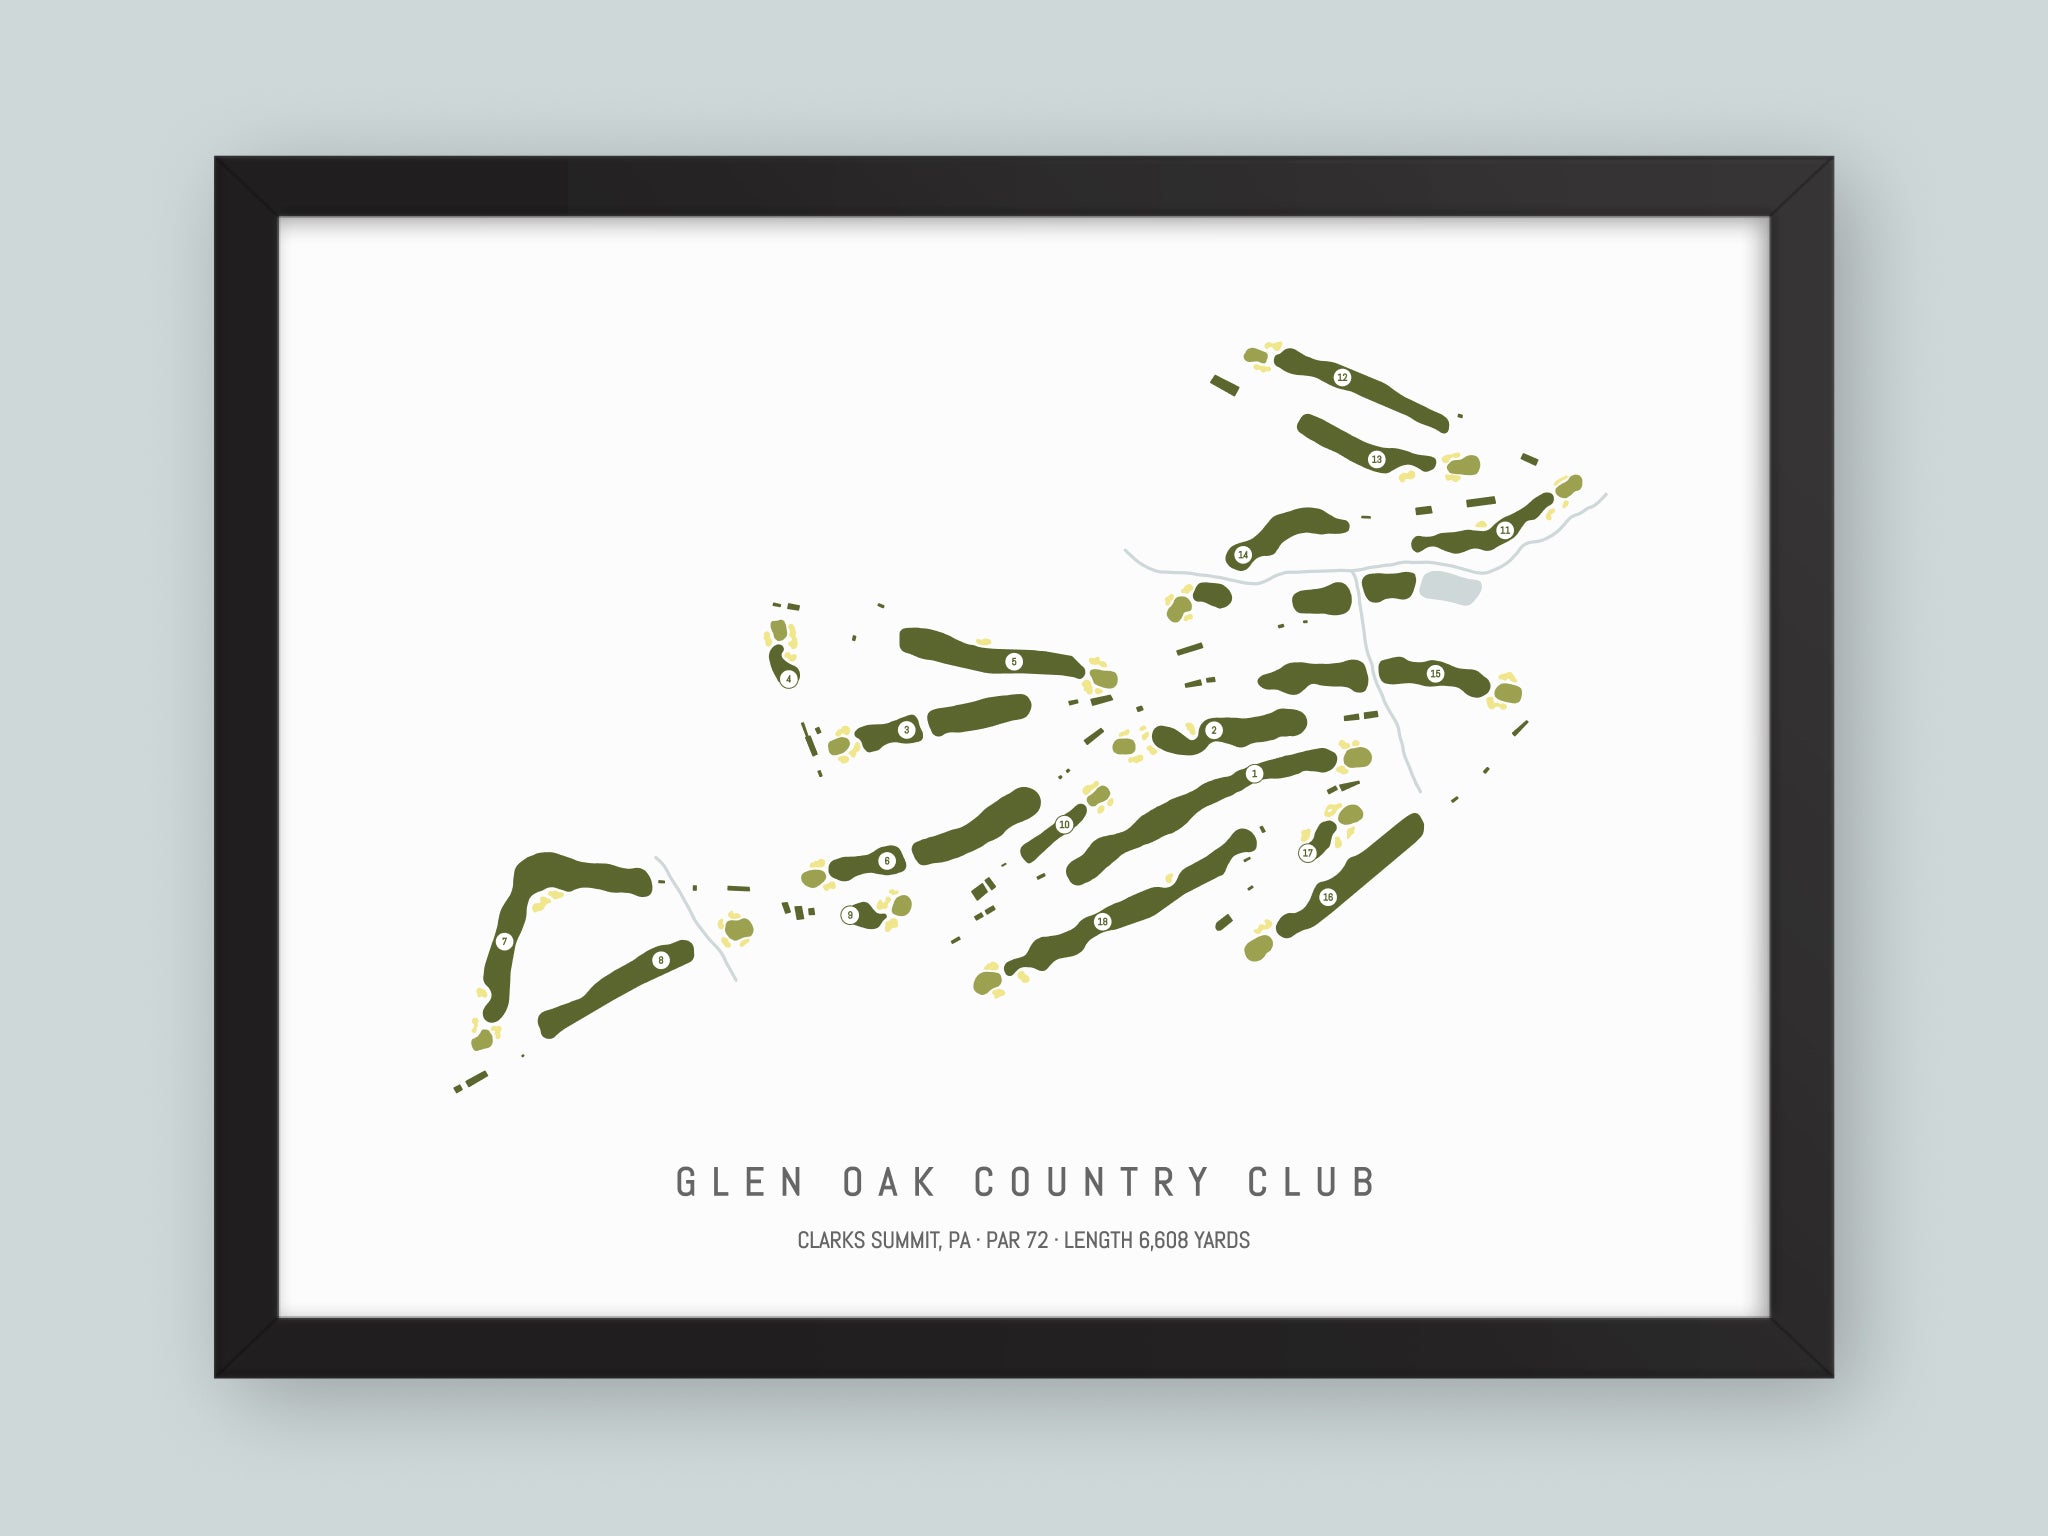 Glen-Oak-Country-Club-PA--Black-Frame-24x18-With-Hole-Numbers